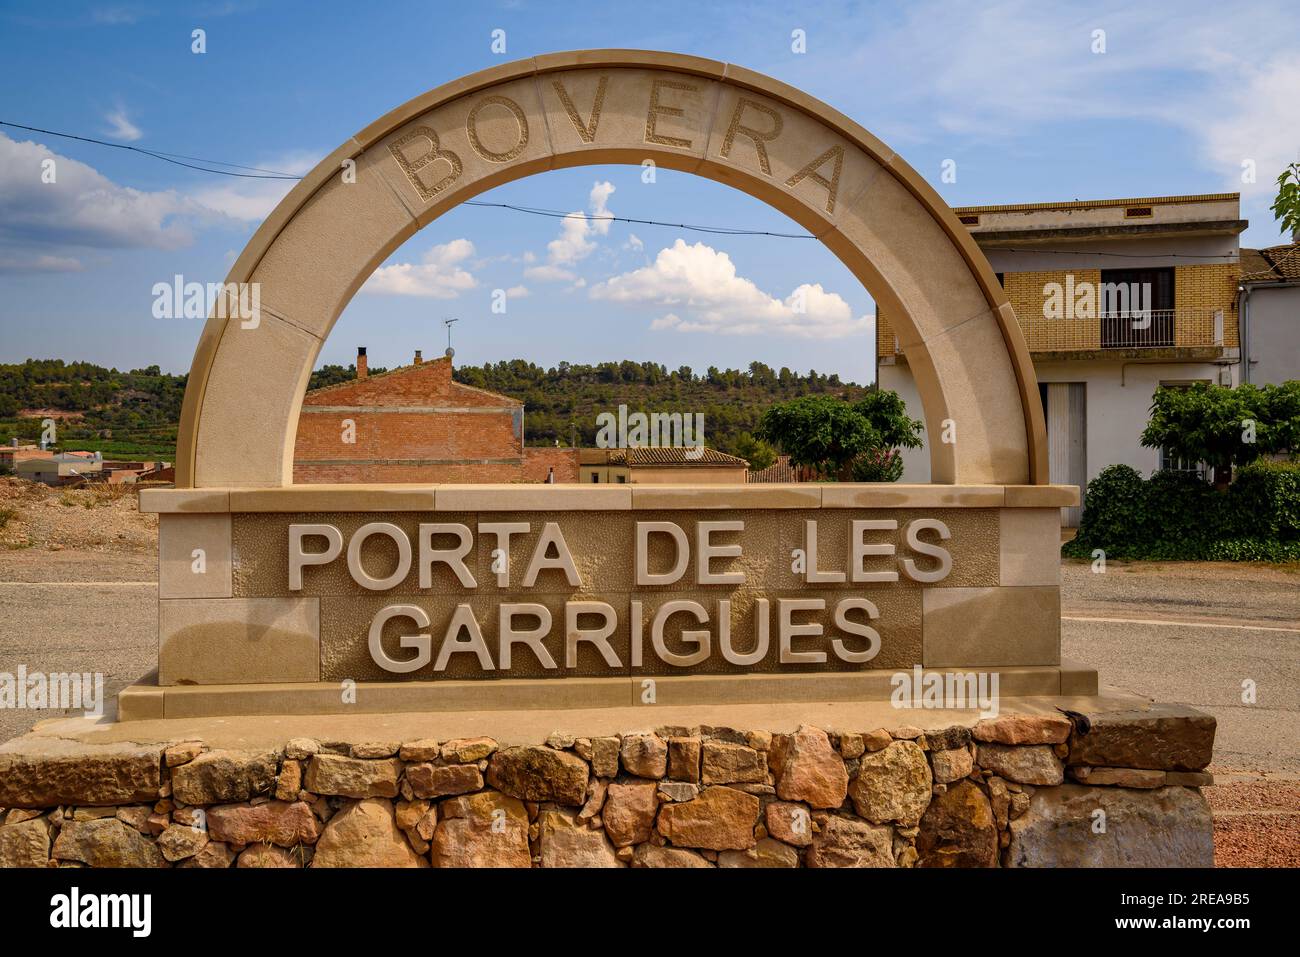 Welcome arch at the entrance to the town of Bovera, at the beginning of Les Garrigues region (Lleida, Catalonia, Spain) ESP: Arco de bienvenida Bovera Stock Photo